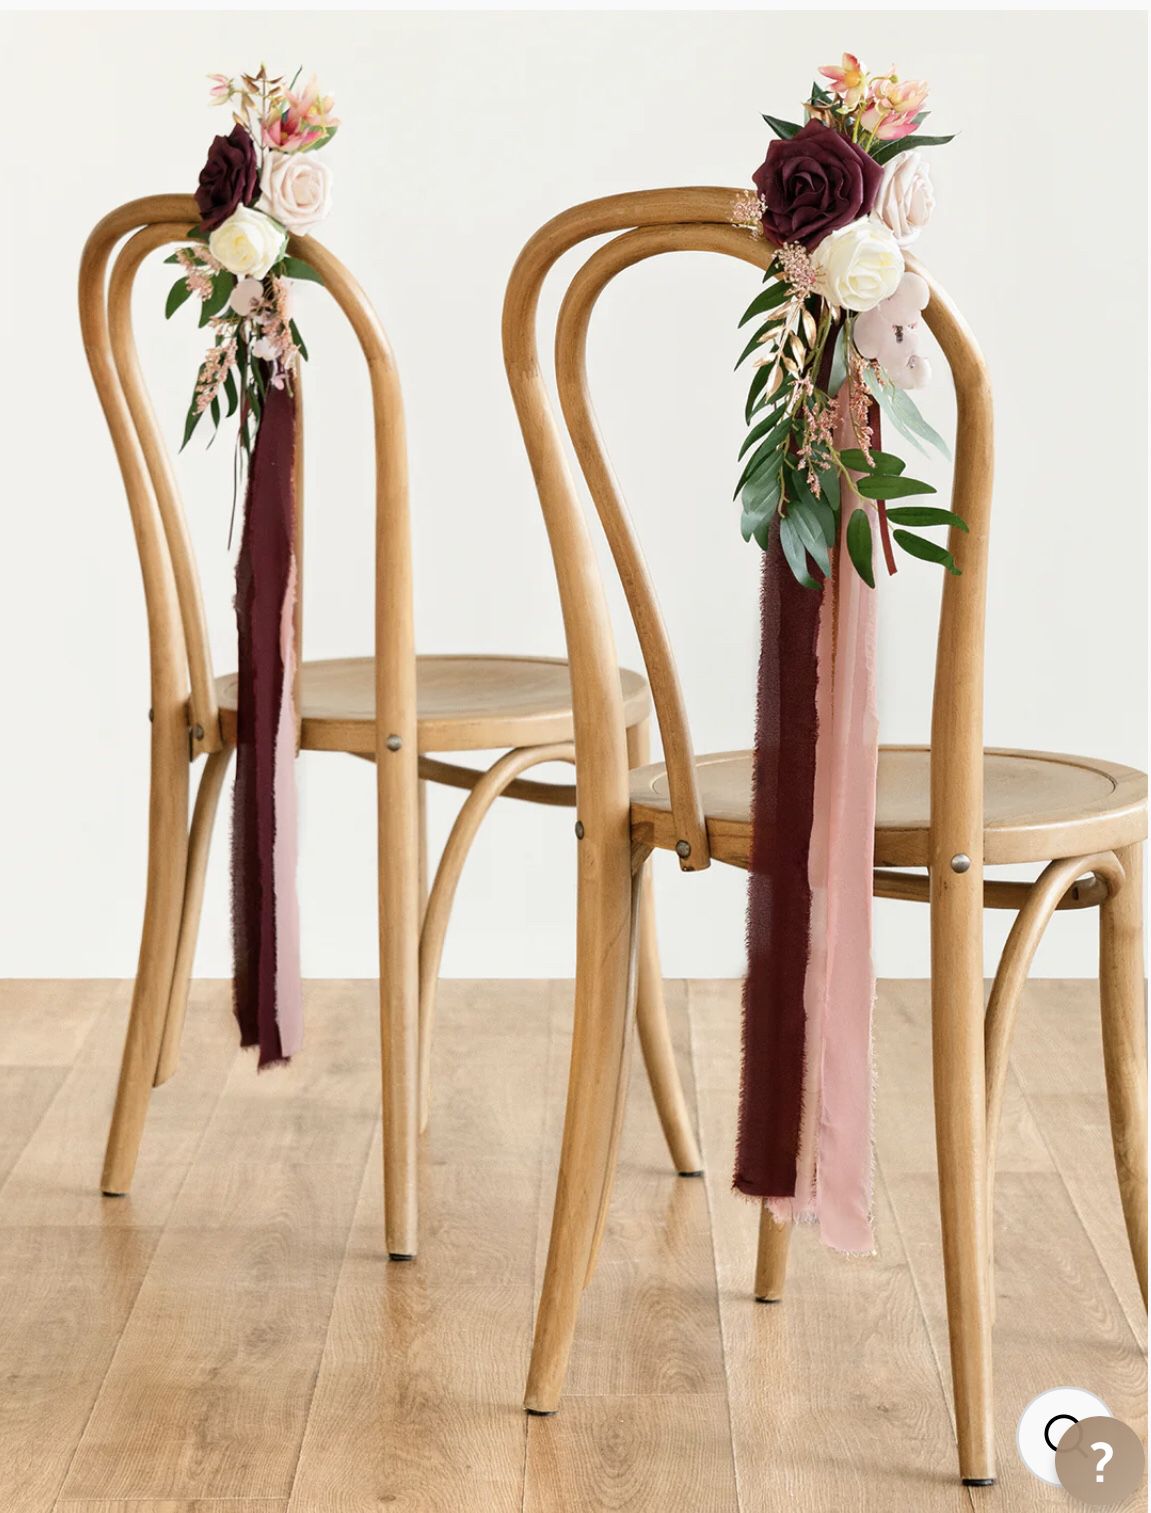 Silk Pew Flowers With Ribbons (4) - Burgundy/blush Pink/ White